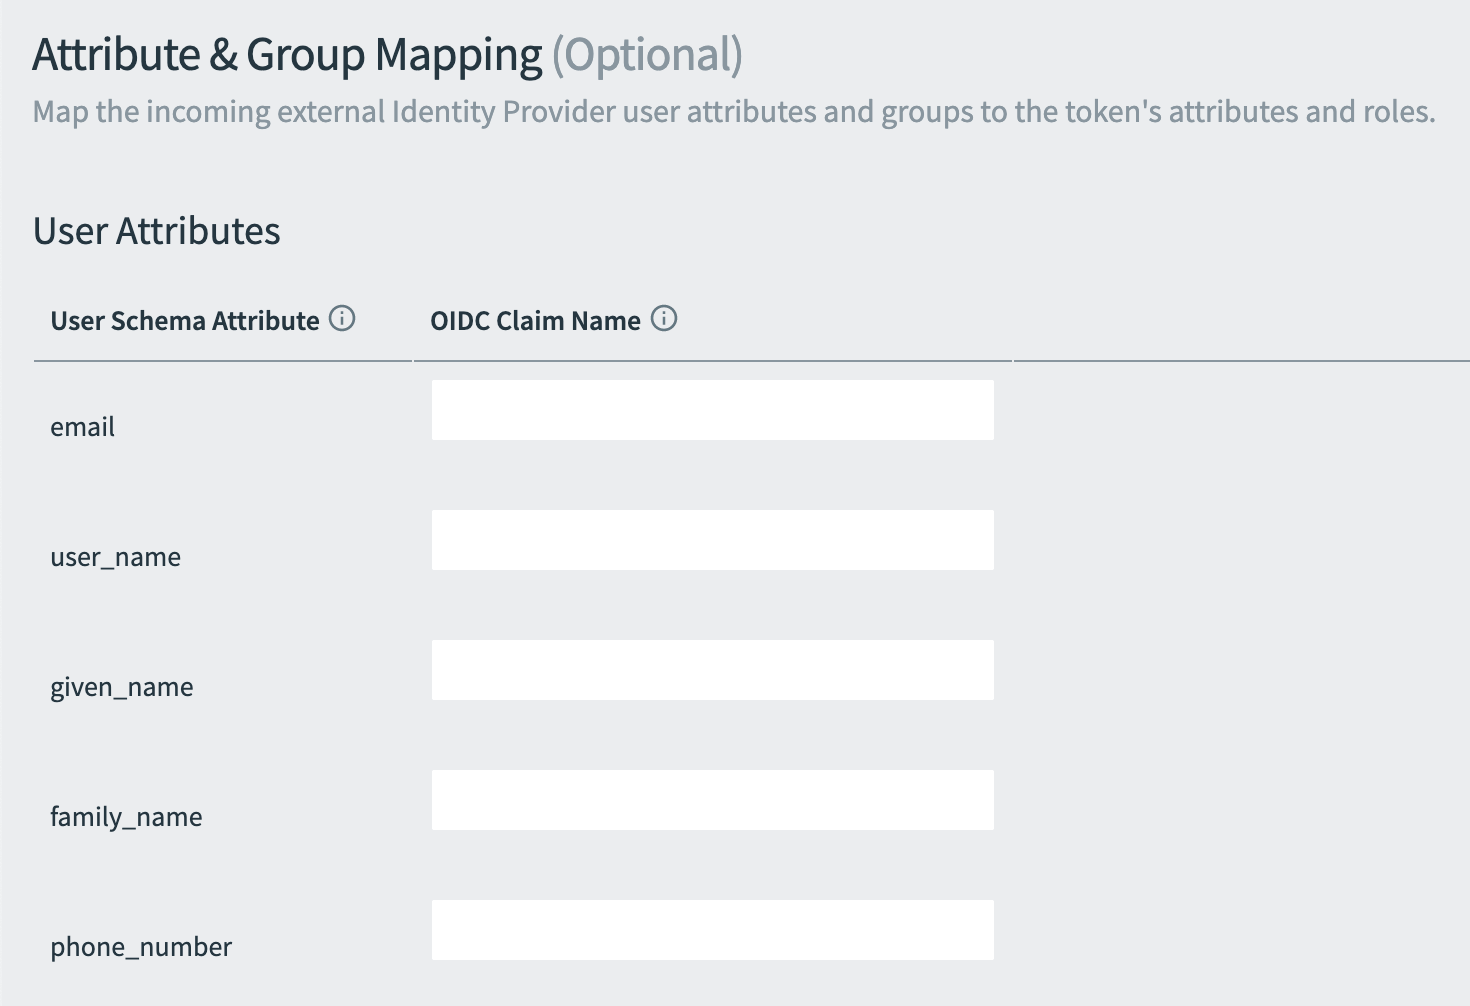 The Attribute & Group Mapping section.
There are OIDC Claim Name fields for email, user name, given name, family name,
and phone number